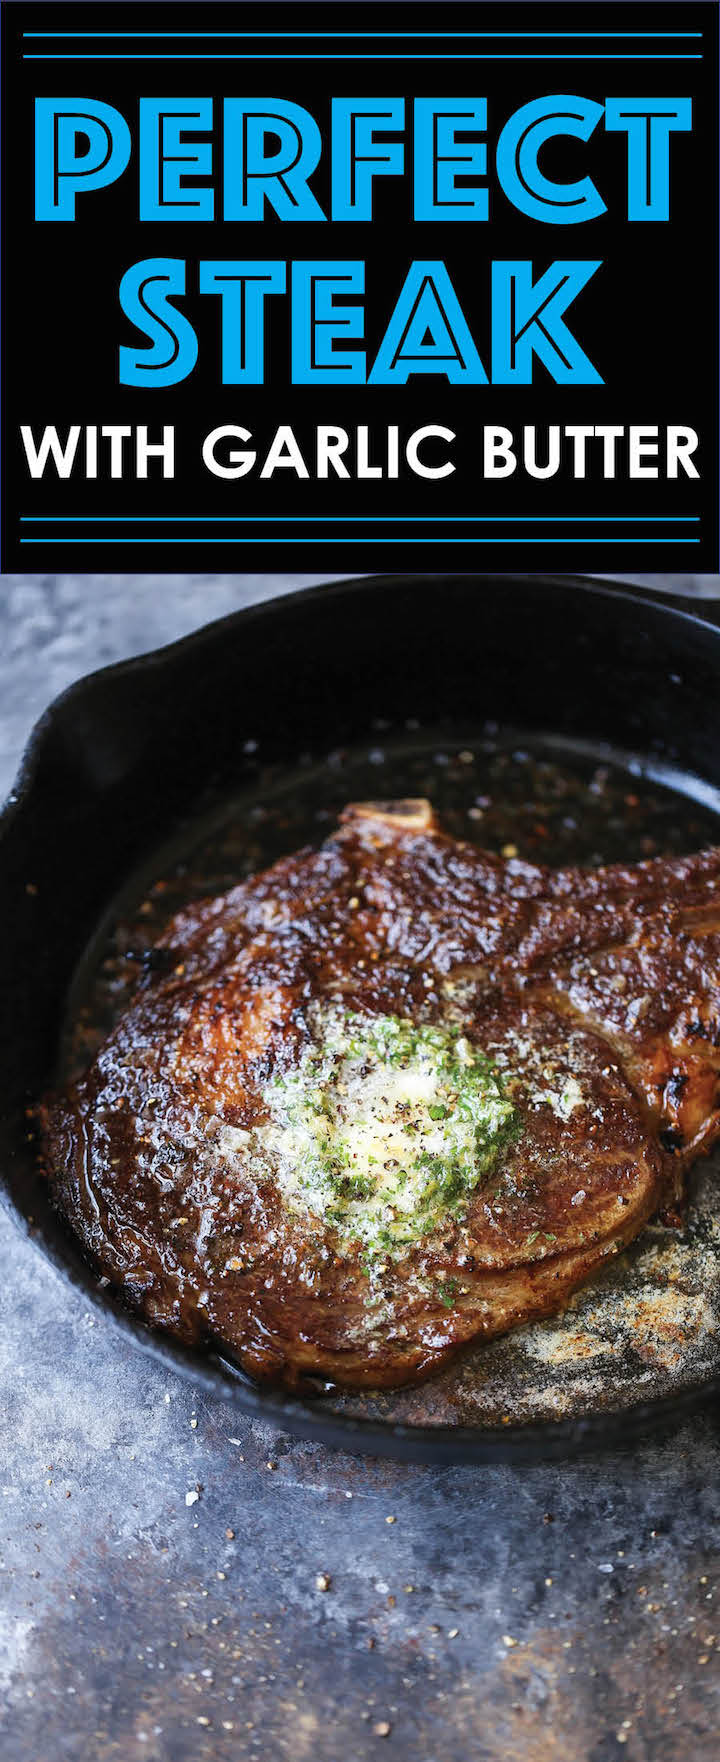 The Perfect Steak with Garlic Butter - Here are my tips and tricks - I promise though - it's so easy! And that melted garlic butter on top is to die for!!!!